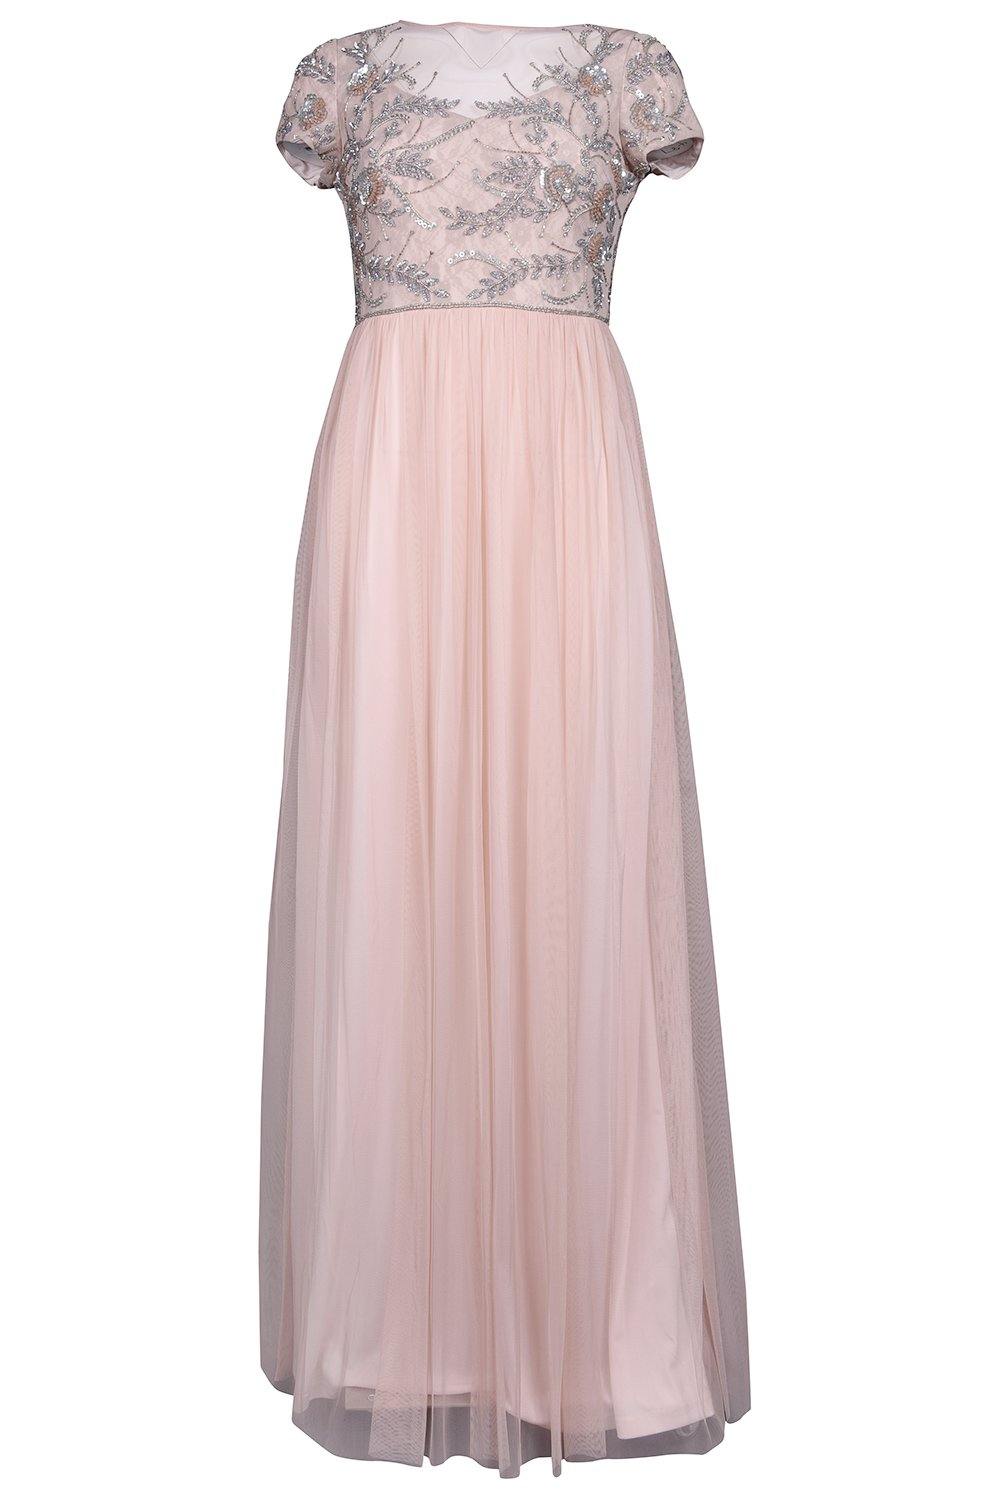 Adrianna Papell Mother of the Bride Long Formal Gown - The Dress Outlet